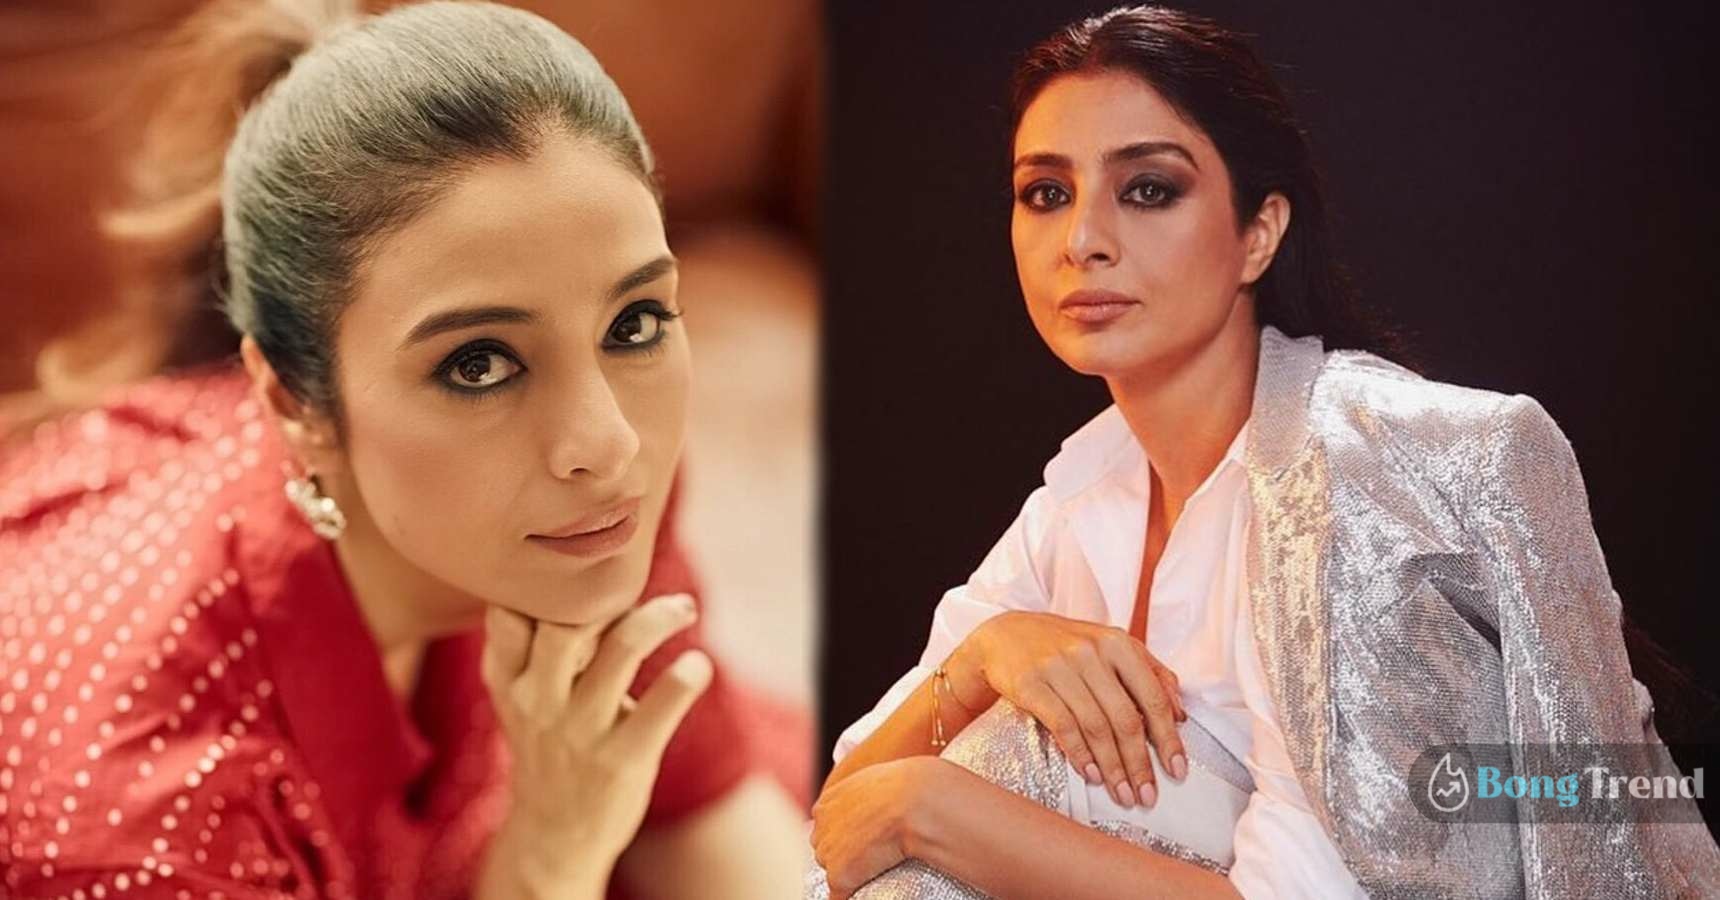 Bollywood Actress Tabu still unmarried because of this actor